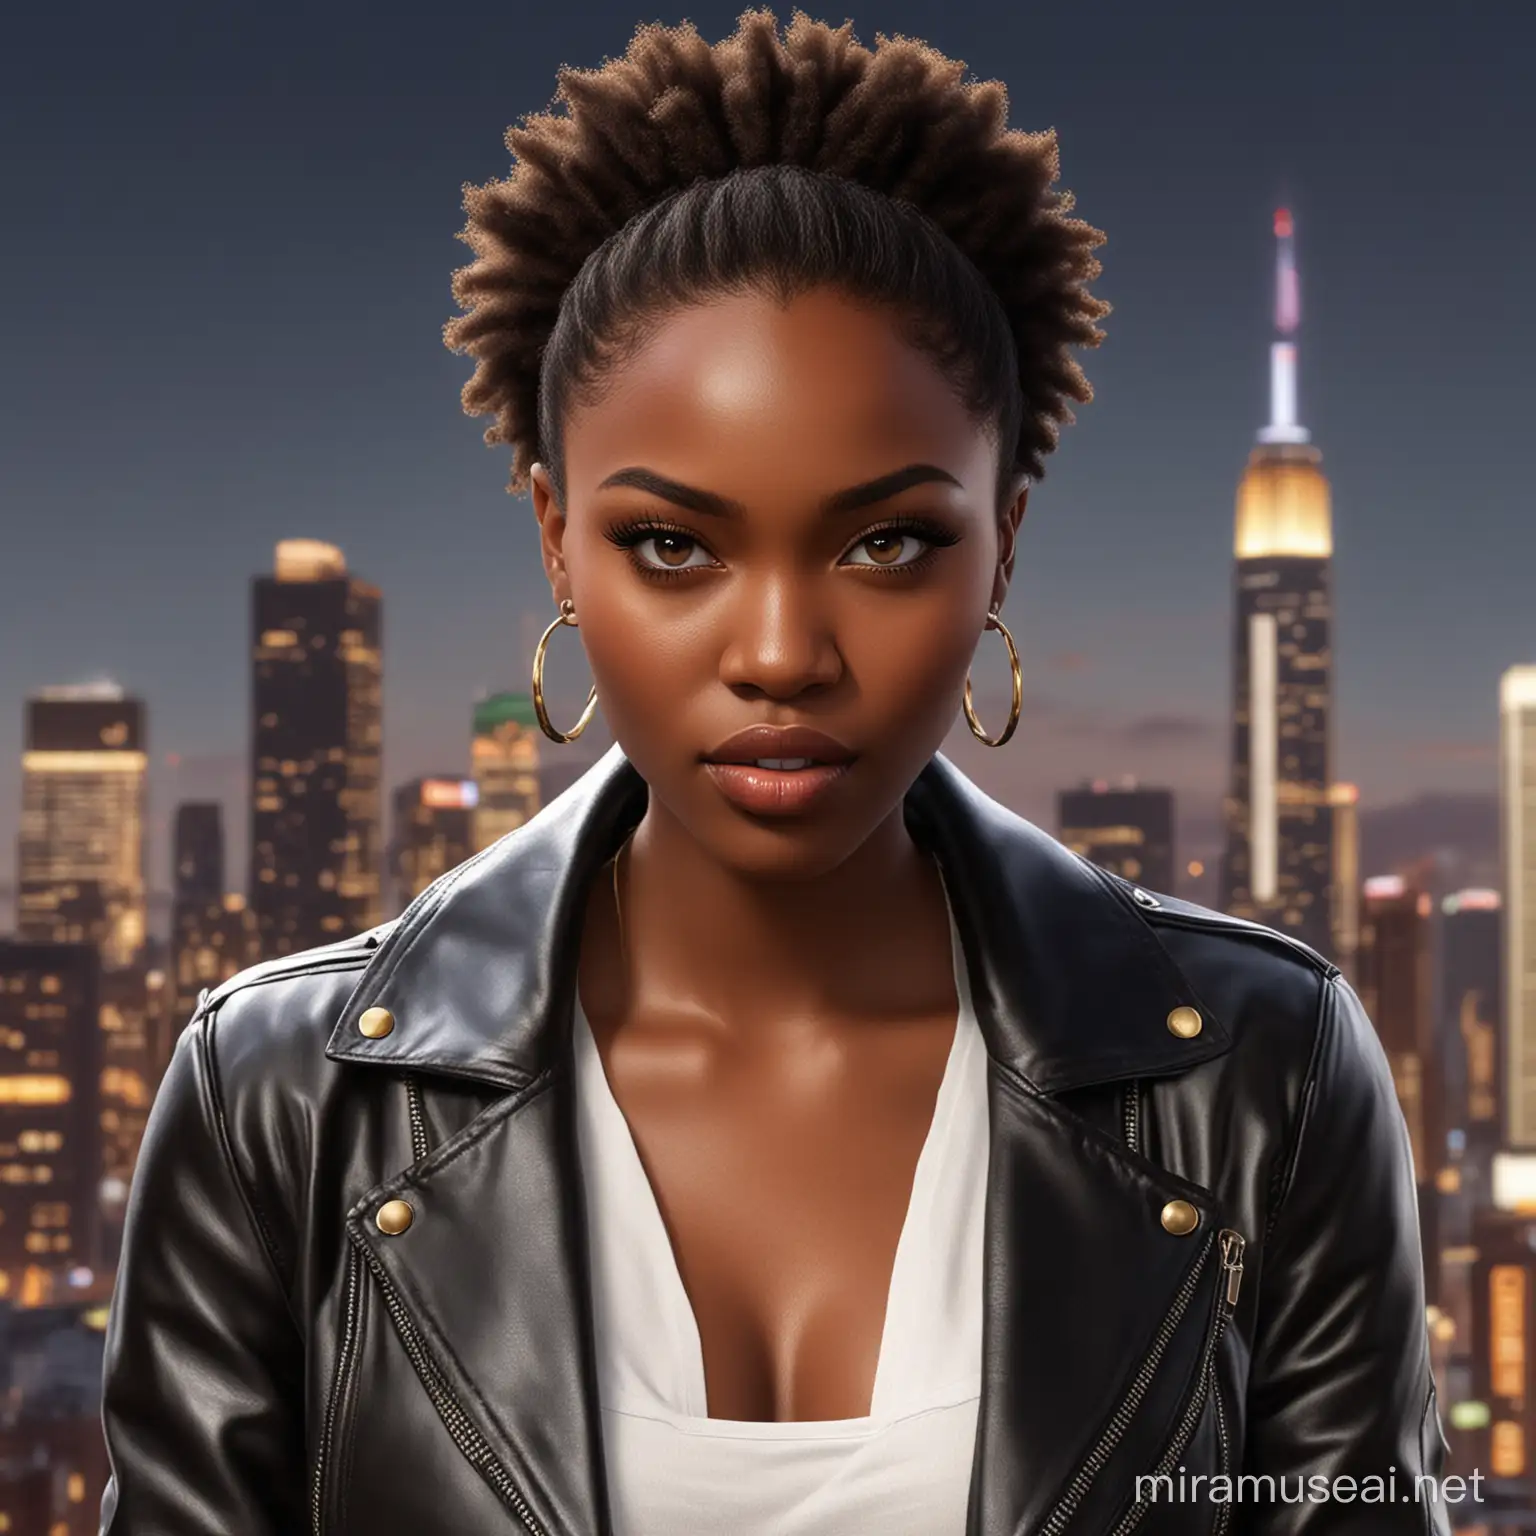 Create a hyper-realistic African woman, wearing a leather jacket, white top an go earnings. Give her long lashes, long nails with polish, gold hoop earnings against a backdrop of New Yor city lights.